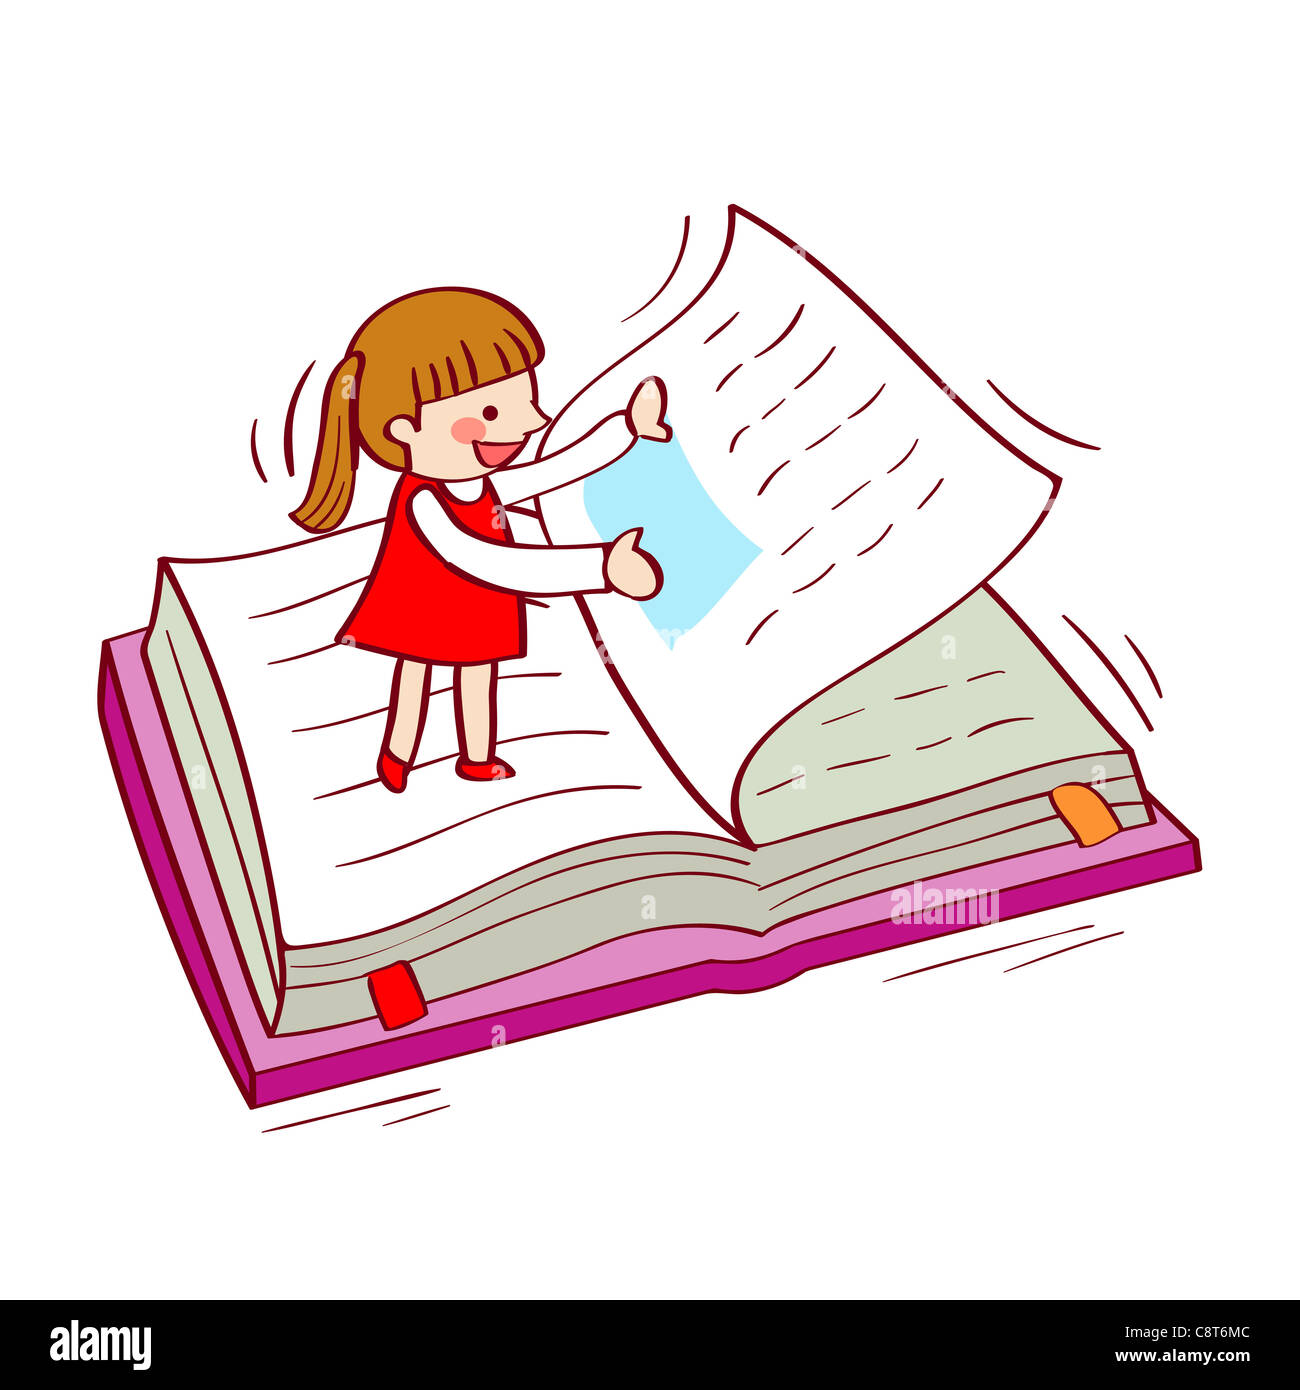 Girl turning page of book Stock Photo